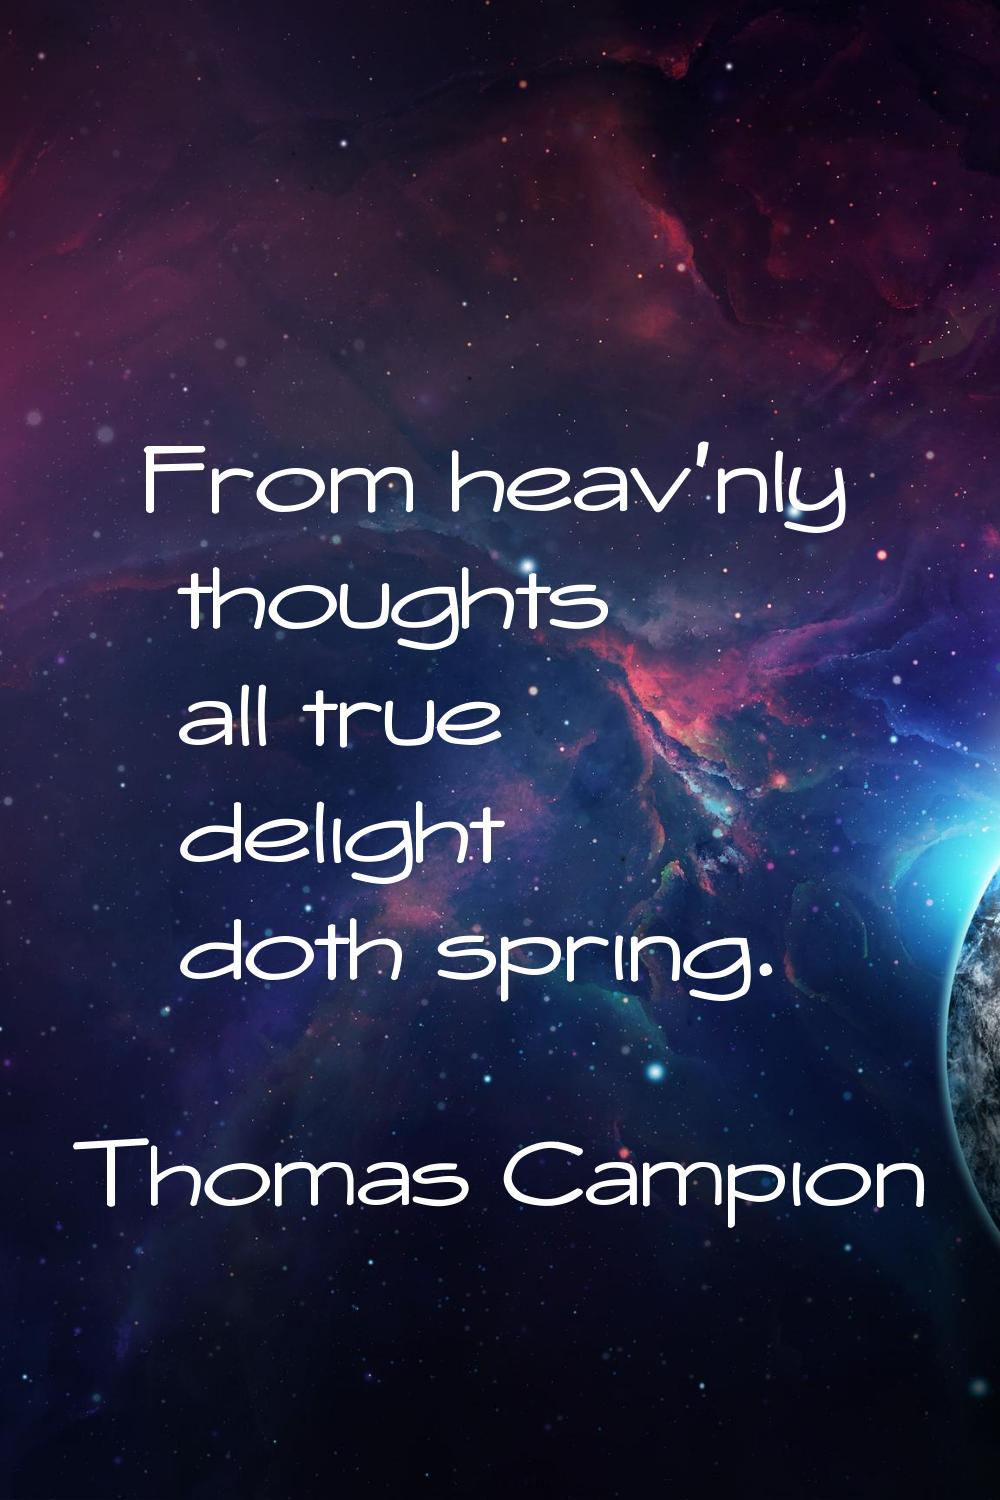 From heav'nly thoughts all true delight doth spring.